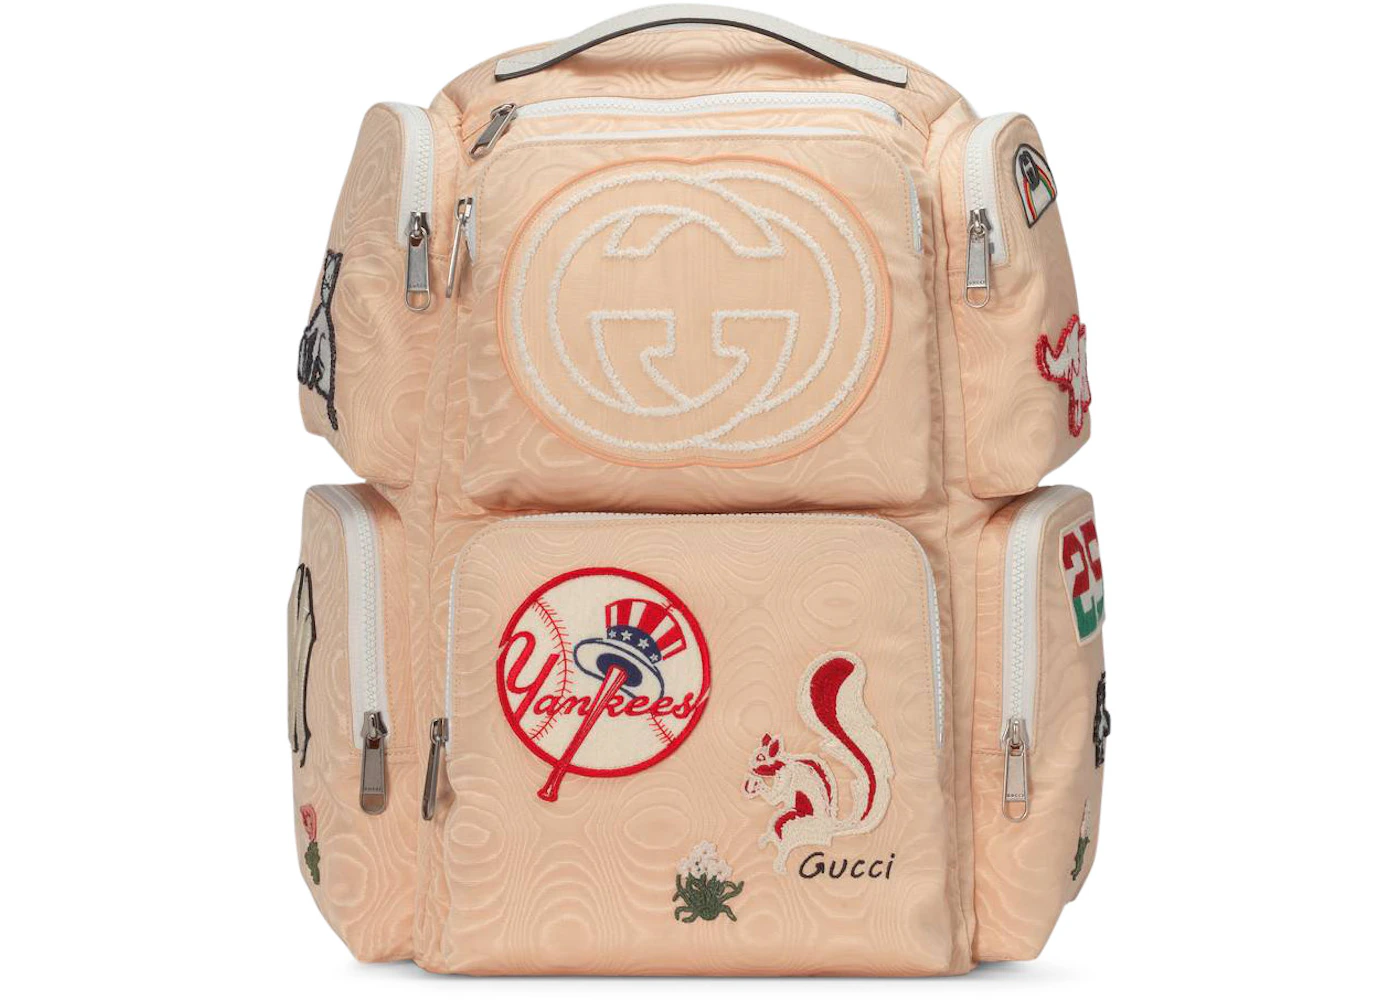 Gucci Backpack NY Yankees Patches Large Nude in Moire - US